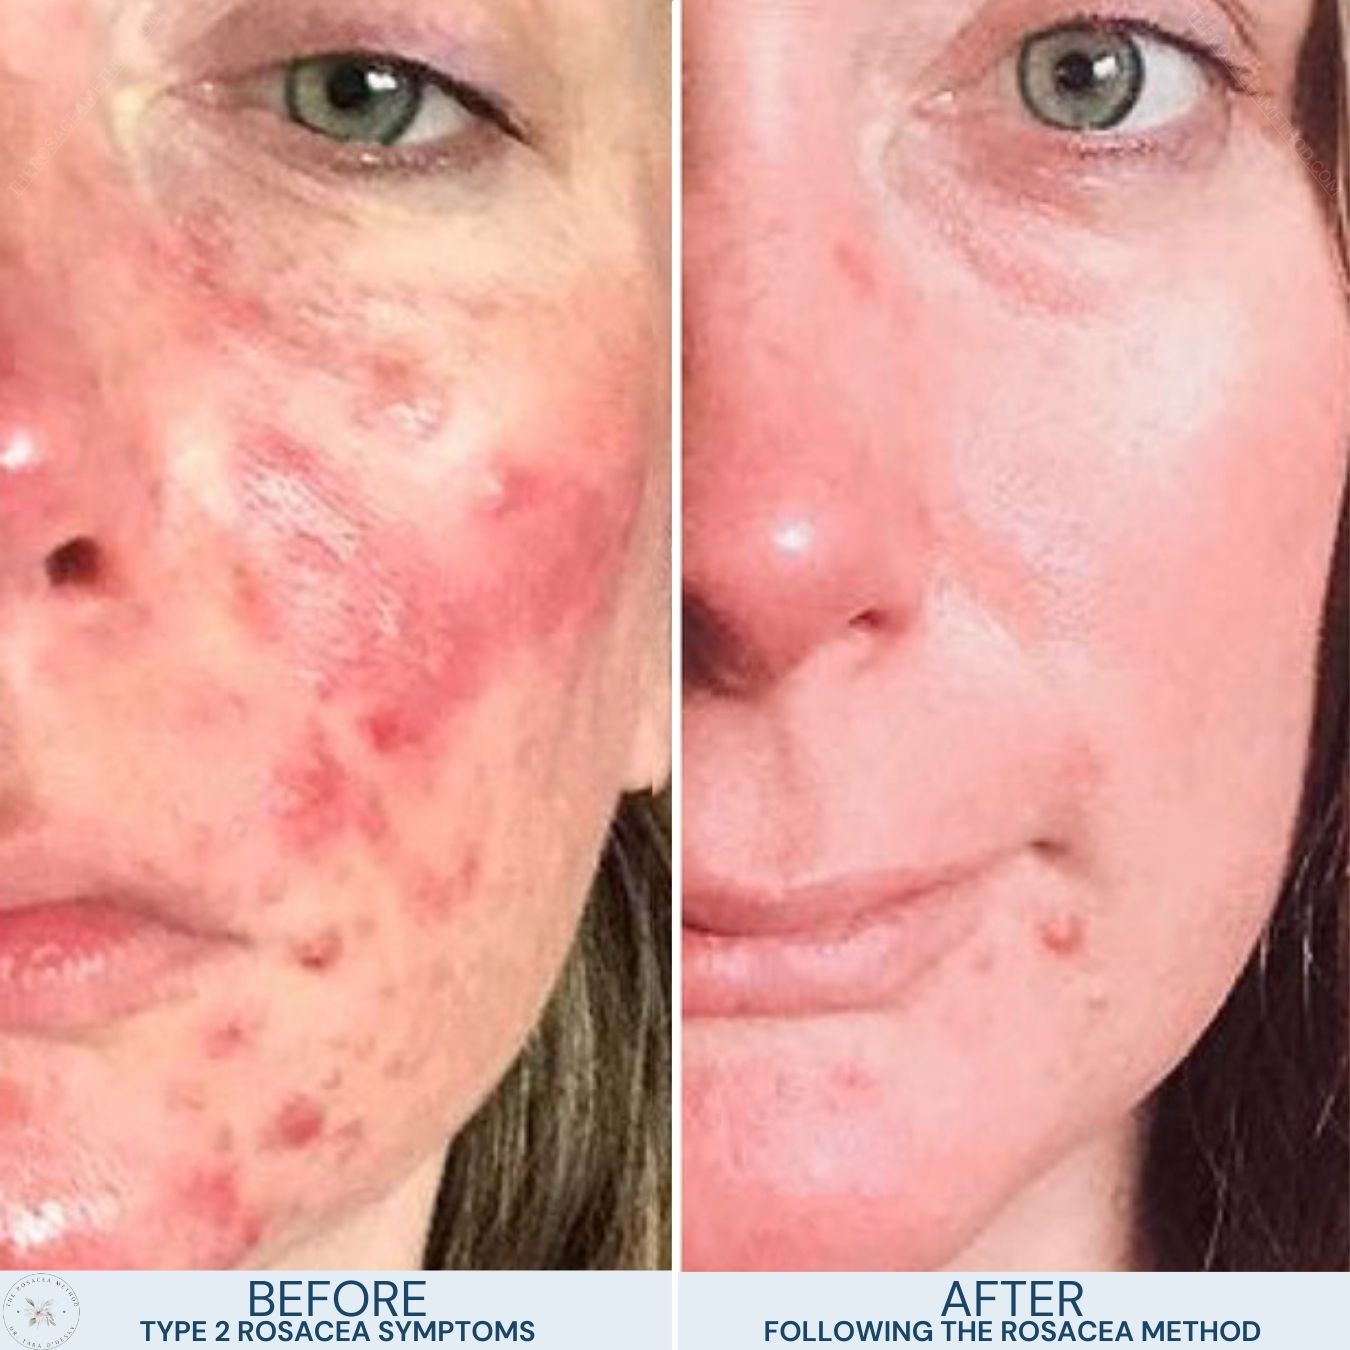 Before and after comparison of a person's face showing transformation with The Rosacea Method. The 'Before' image on the left displays prominent redness and papules typical of Type 2 Rosacea symptoms. The 'After' image on the right shows a marked reduction in inflammation and blemishes, resulting in clearer, calmer skin. These before symptoms are what makes distinguishing Papulopustular Rosacea vs acne difficult